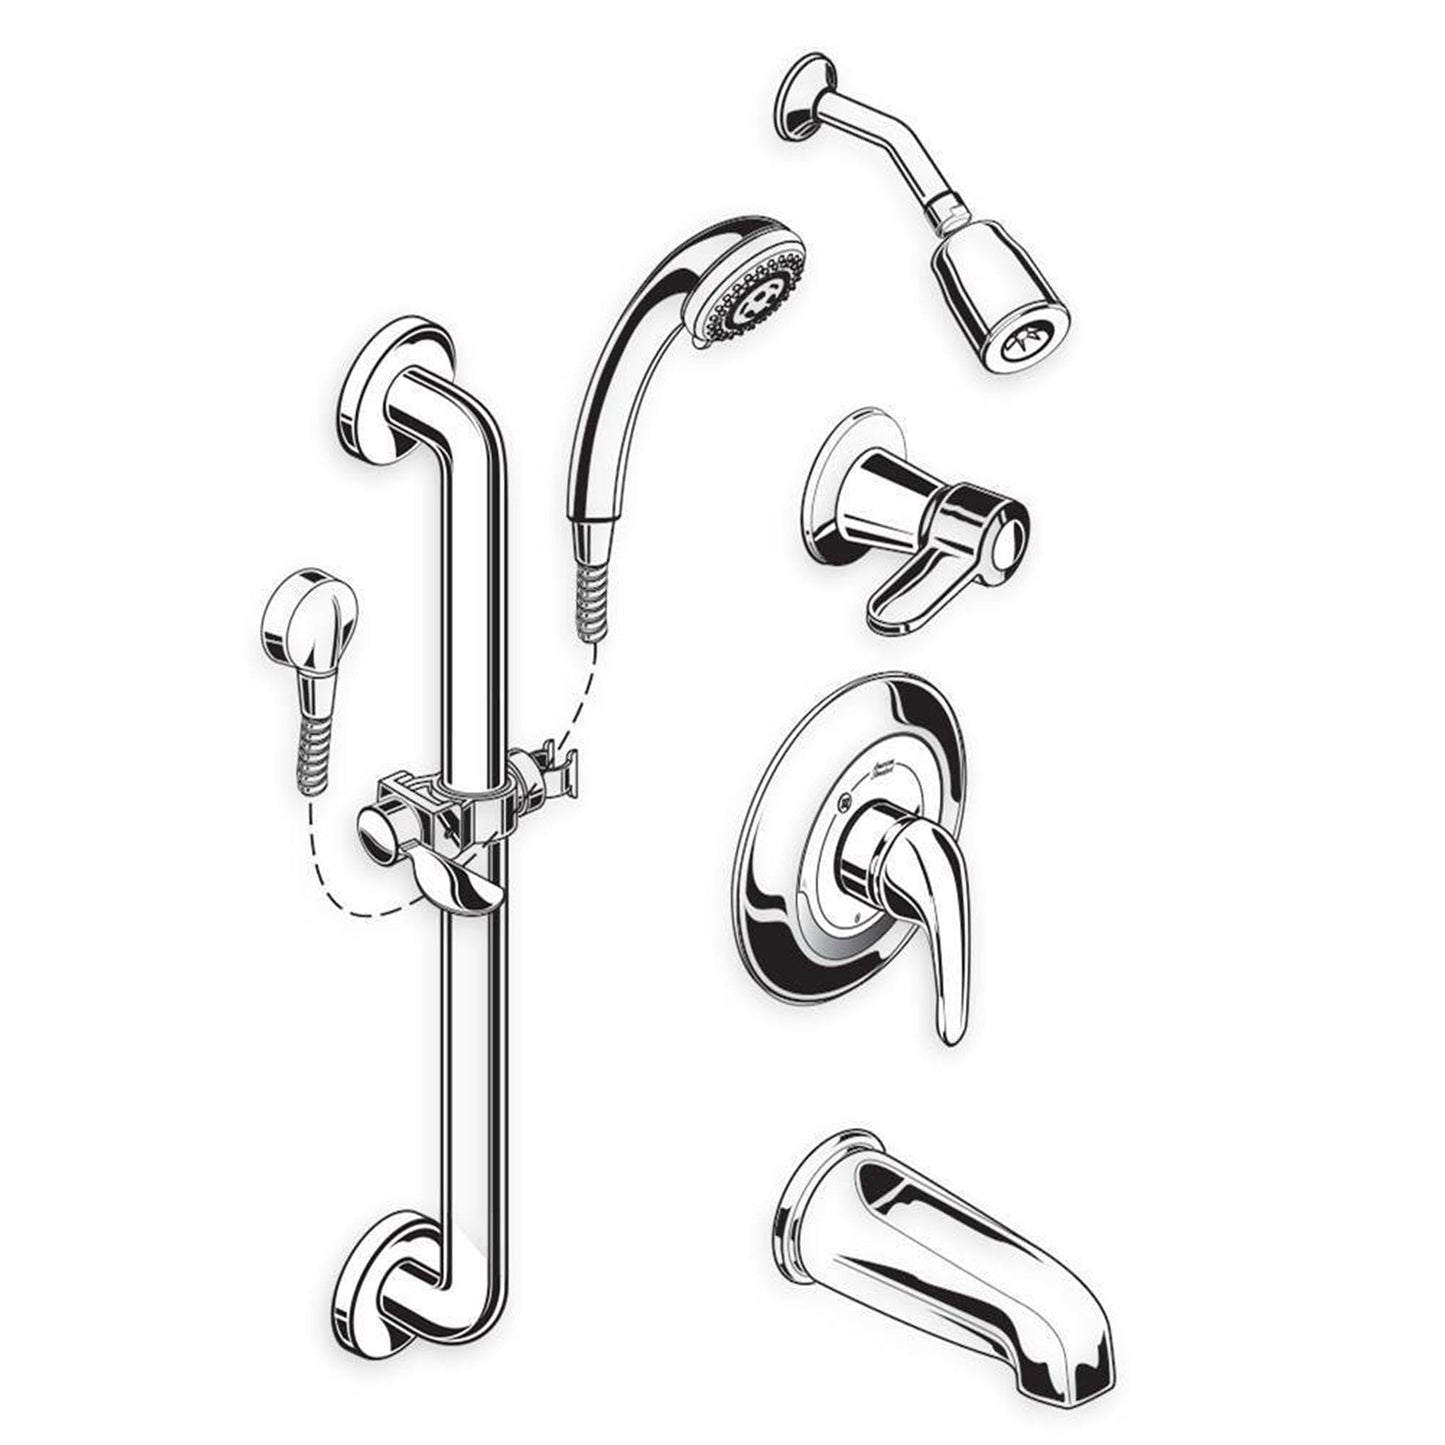 COMMERCIAL SHOWER SYSTEM KIT, 1.5 GPM, CHROME